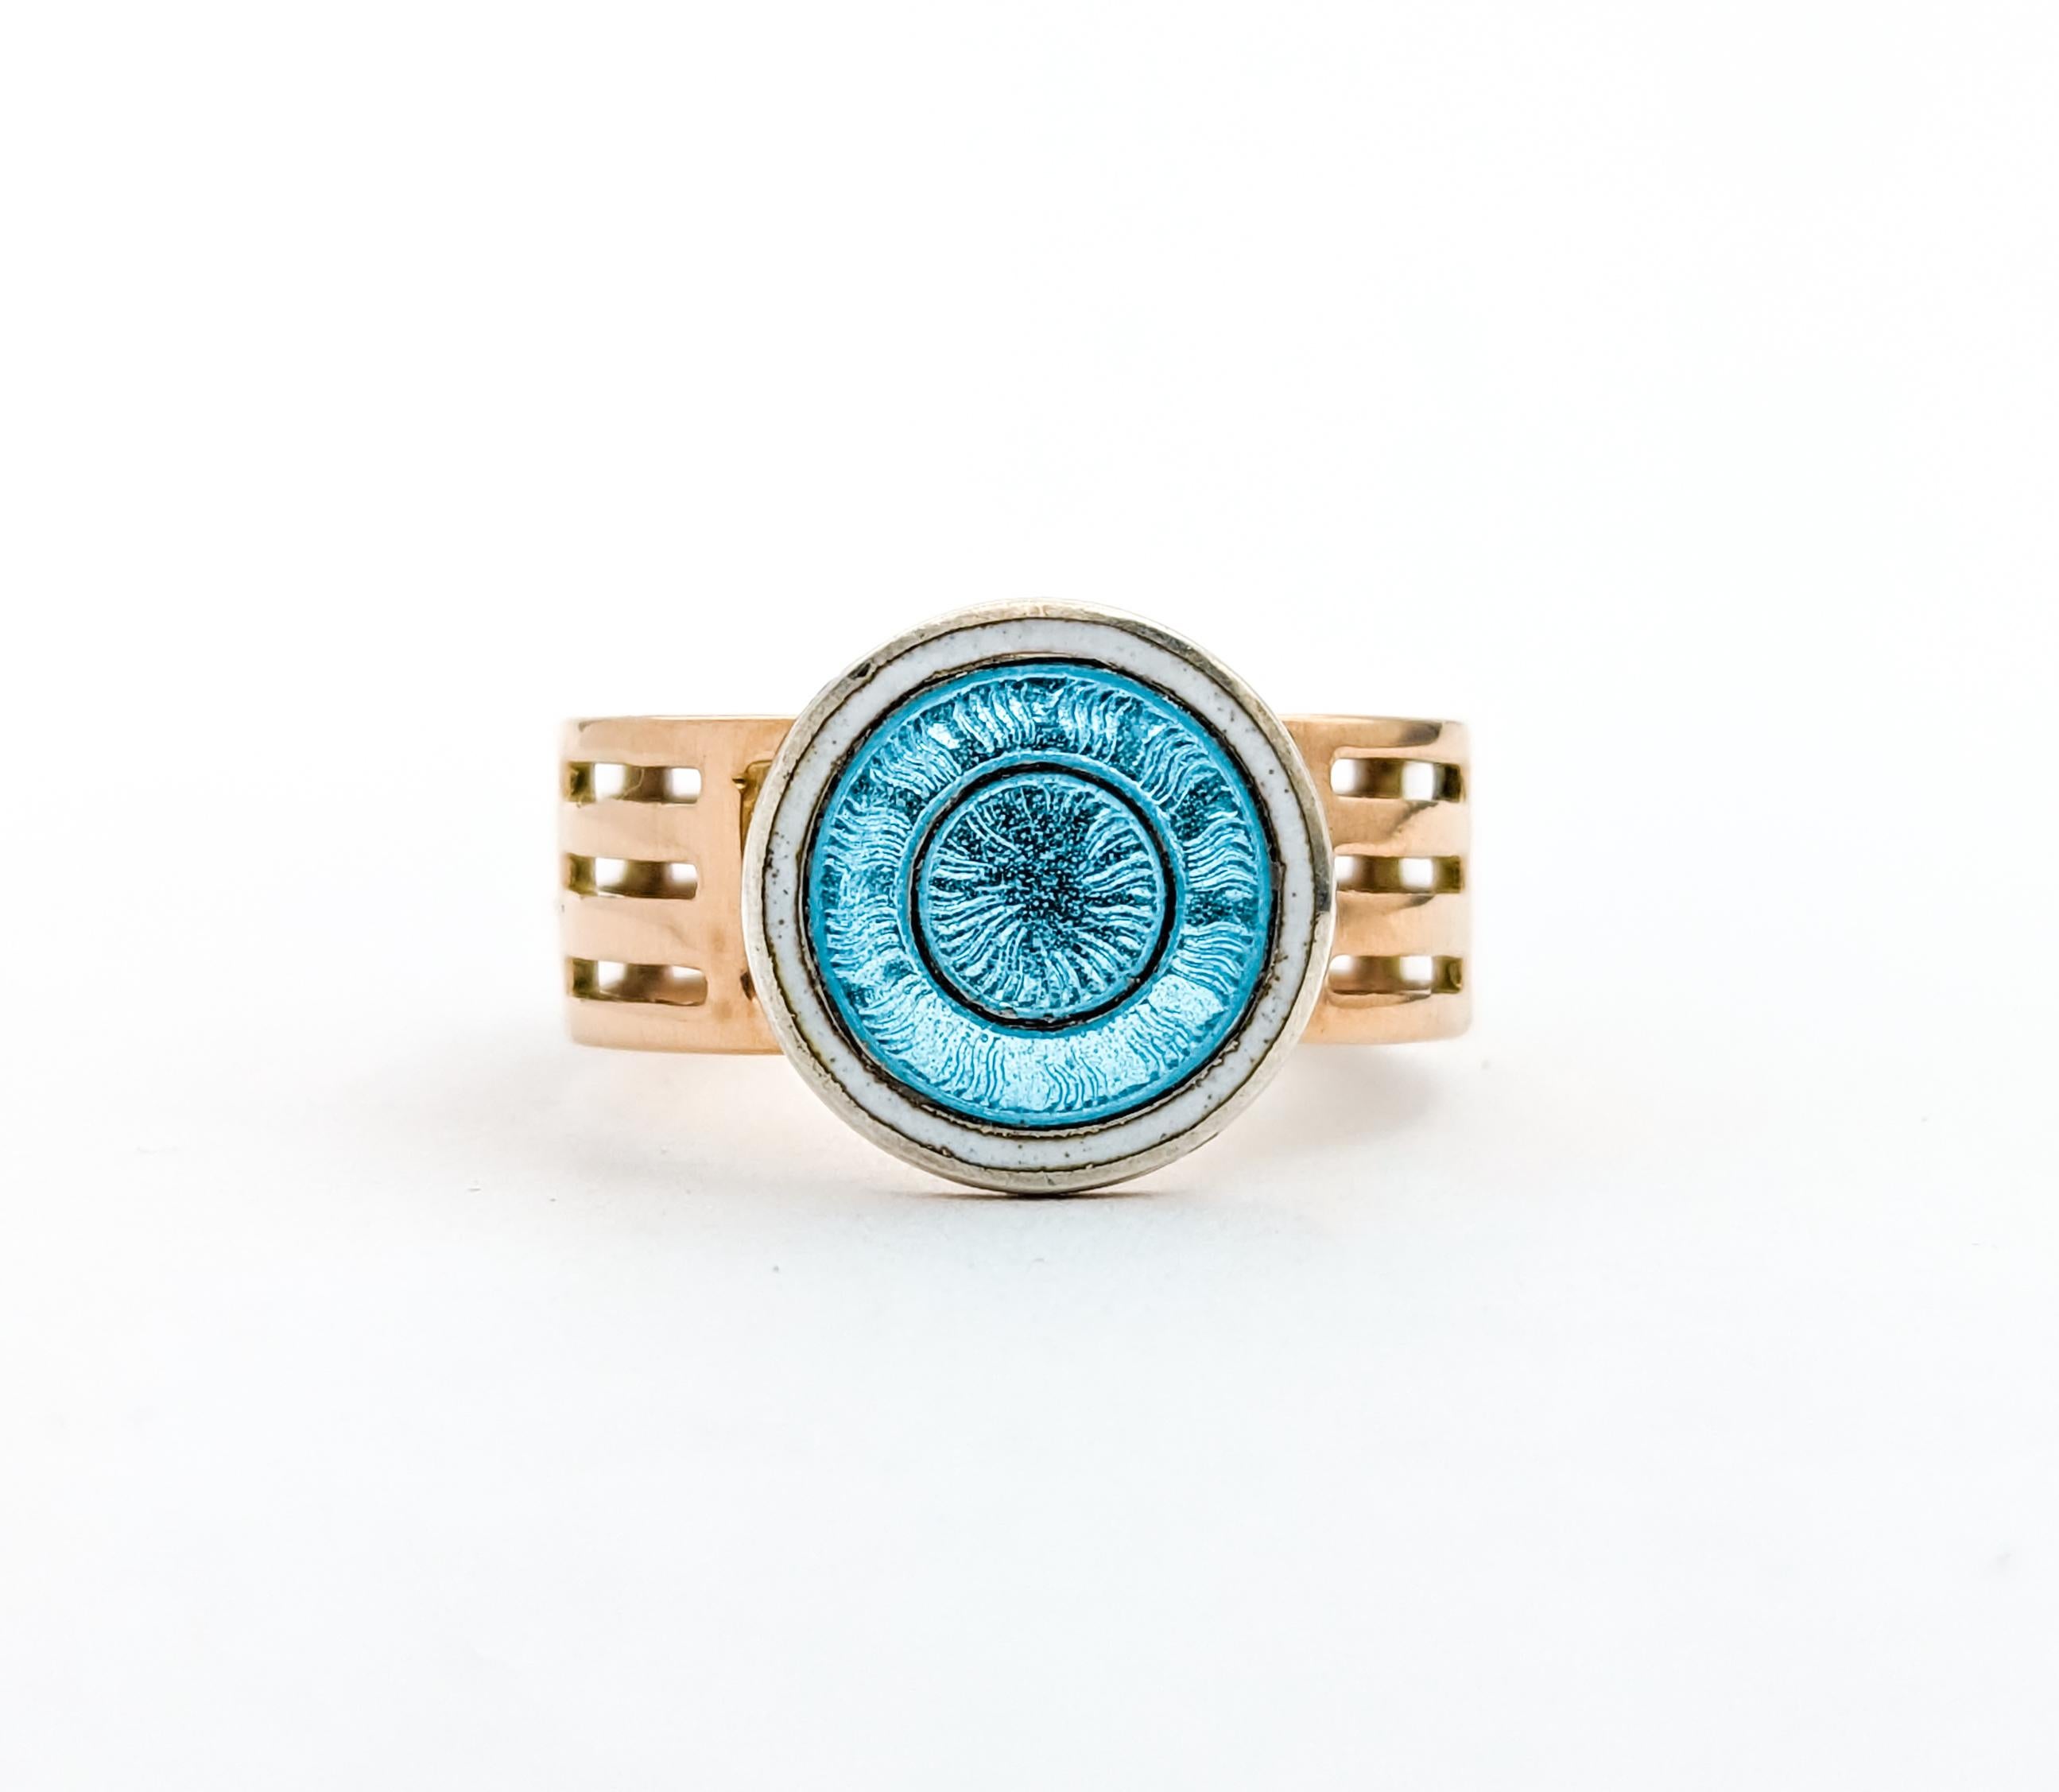 Enamelled Blue Disc Ring In Yellow Gold

Discover the charm of this vintage enamel ring, masterfully crafted in 14k yellow gold. This unique piece features an eye-catching Guilloché enameled blue disc with a white border as its centerpiece. The wide